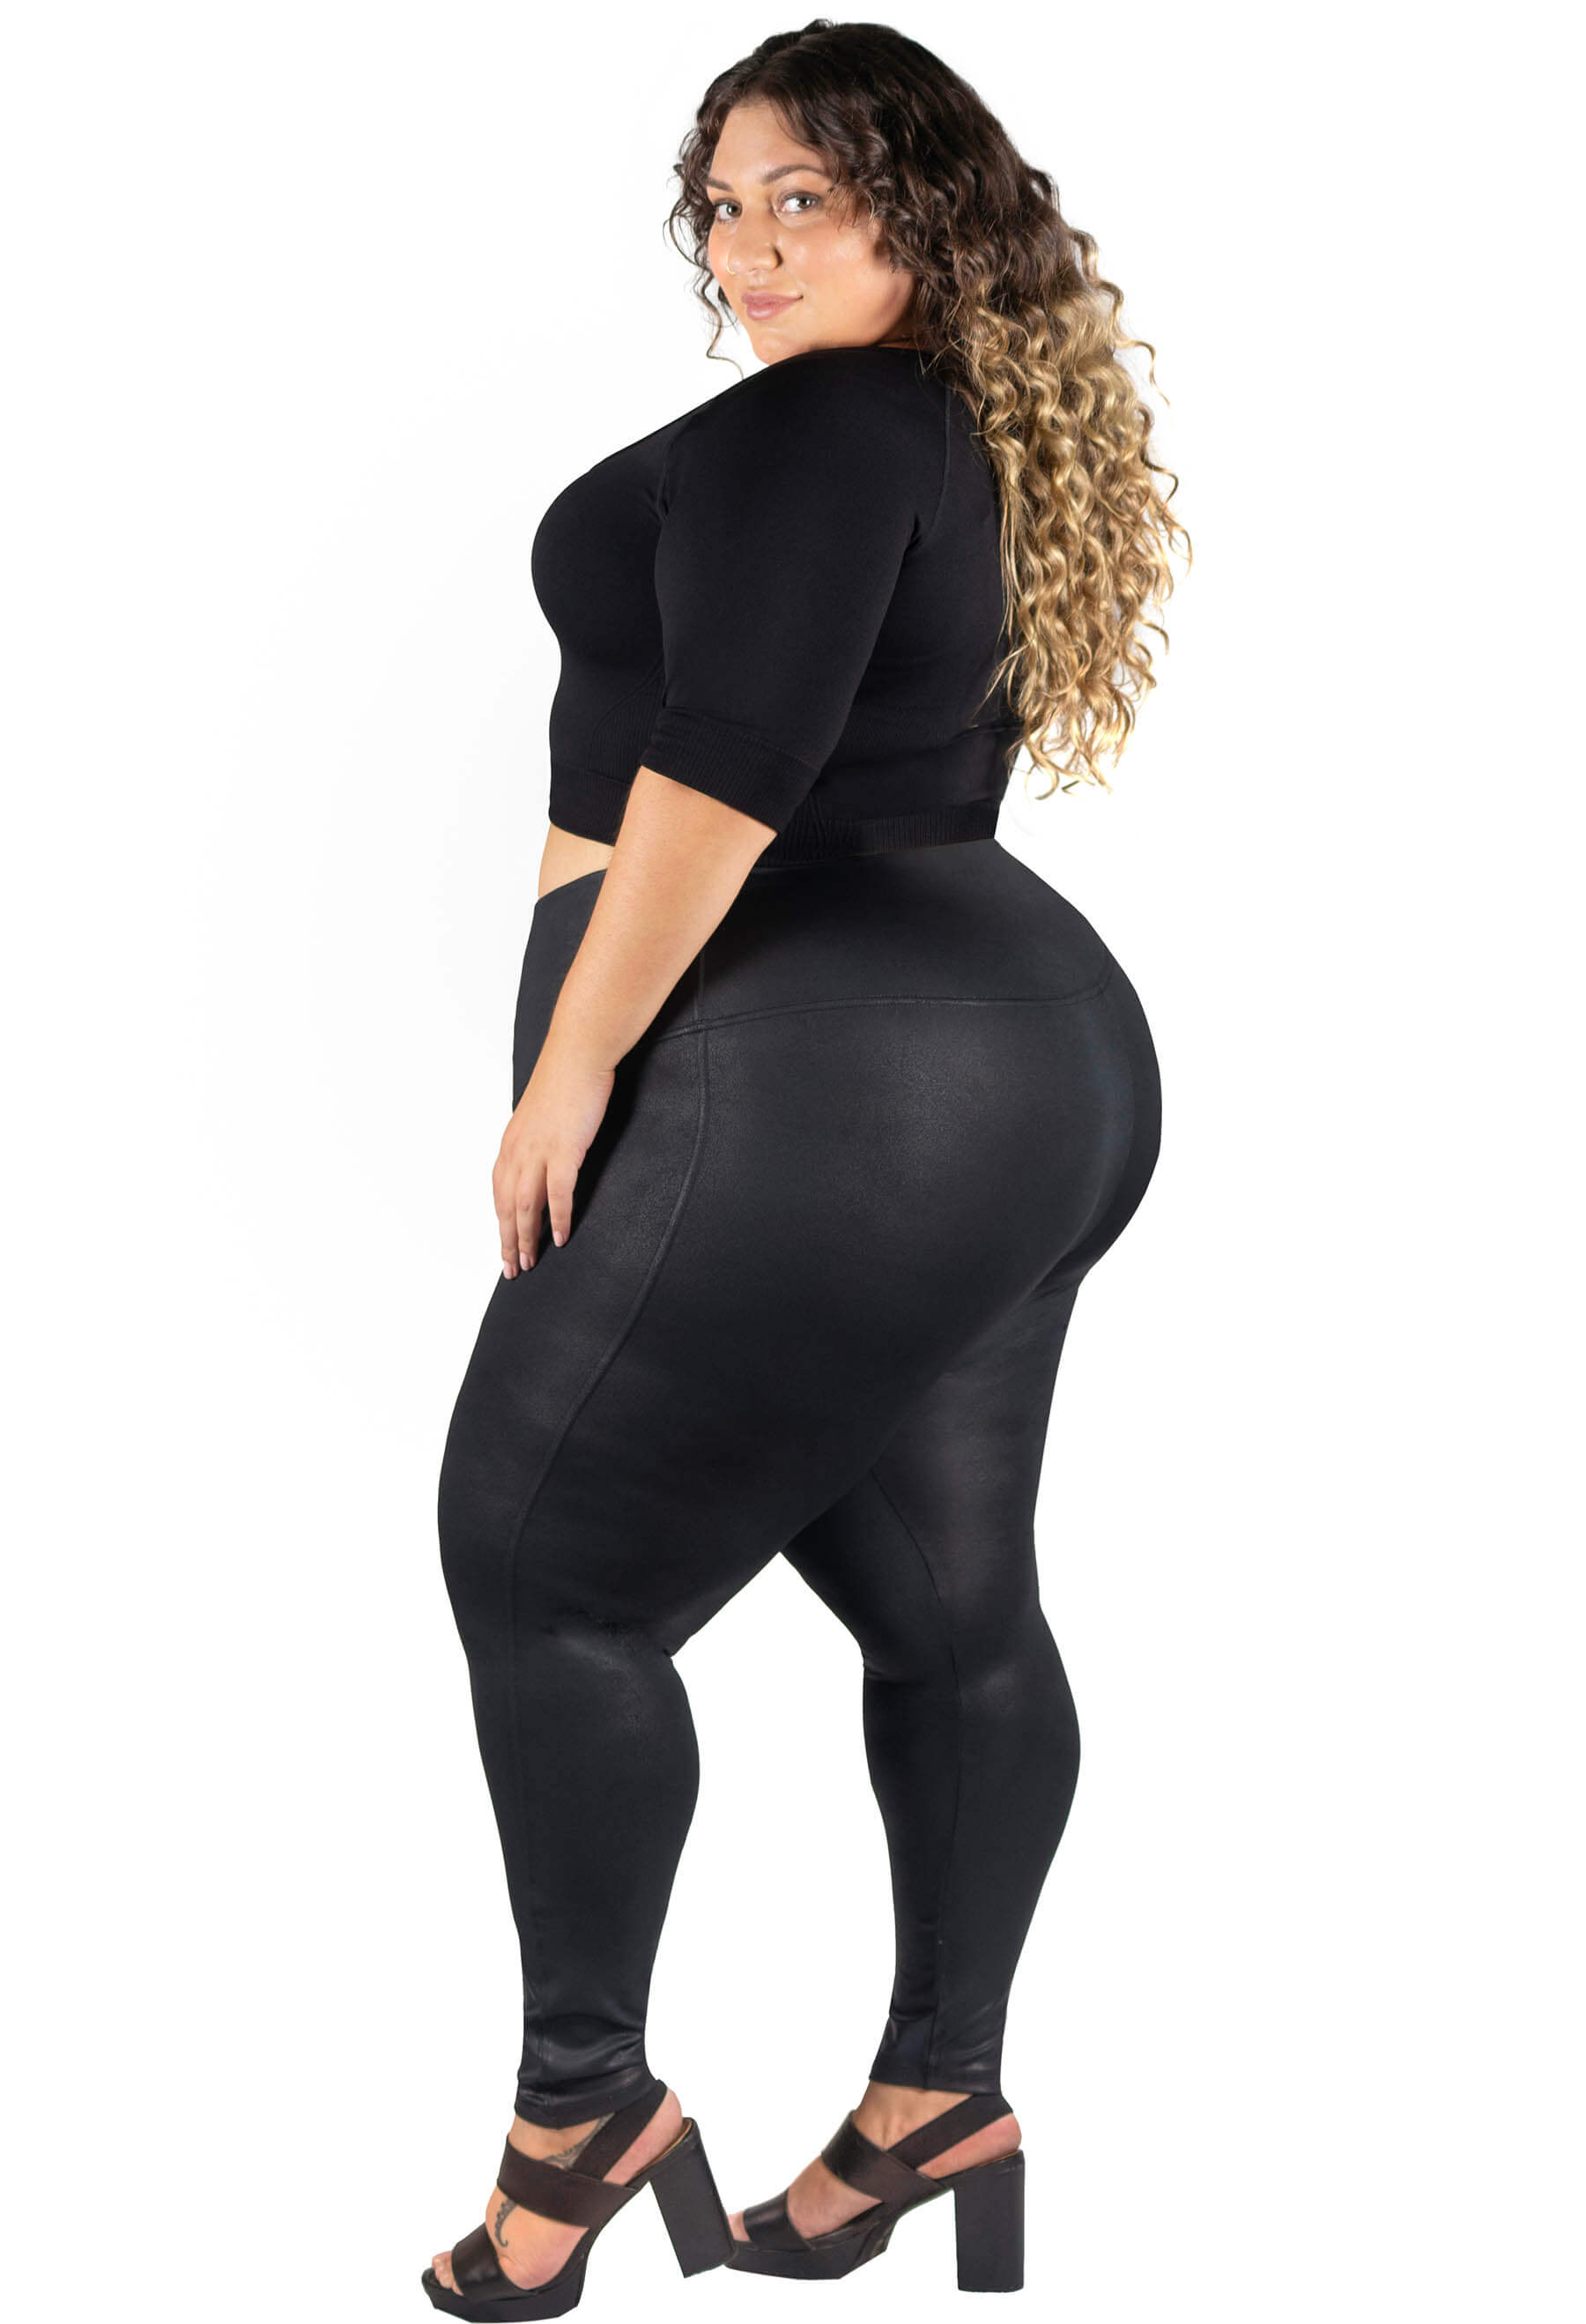  Wet Look Shine Leggings - Extra Long for Tall Women - Inside  Leg 38 inches (Plus Size UK 18/US 14) Black : Clothing, Shoes & Jewelry